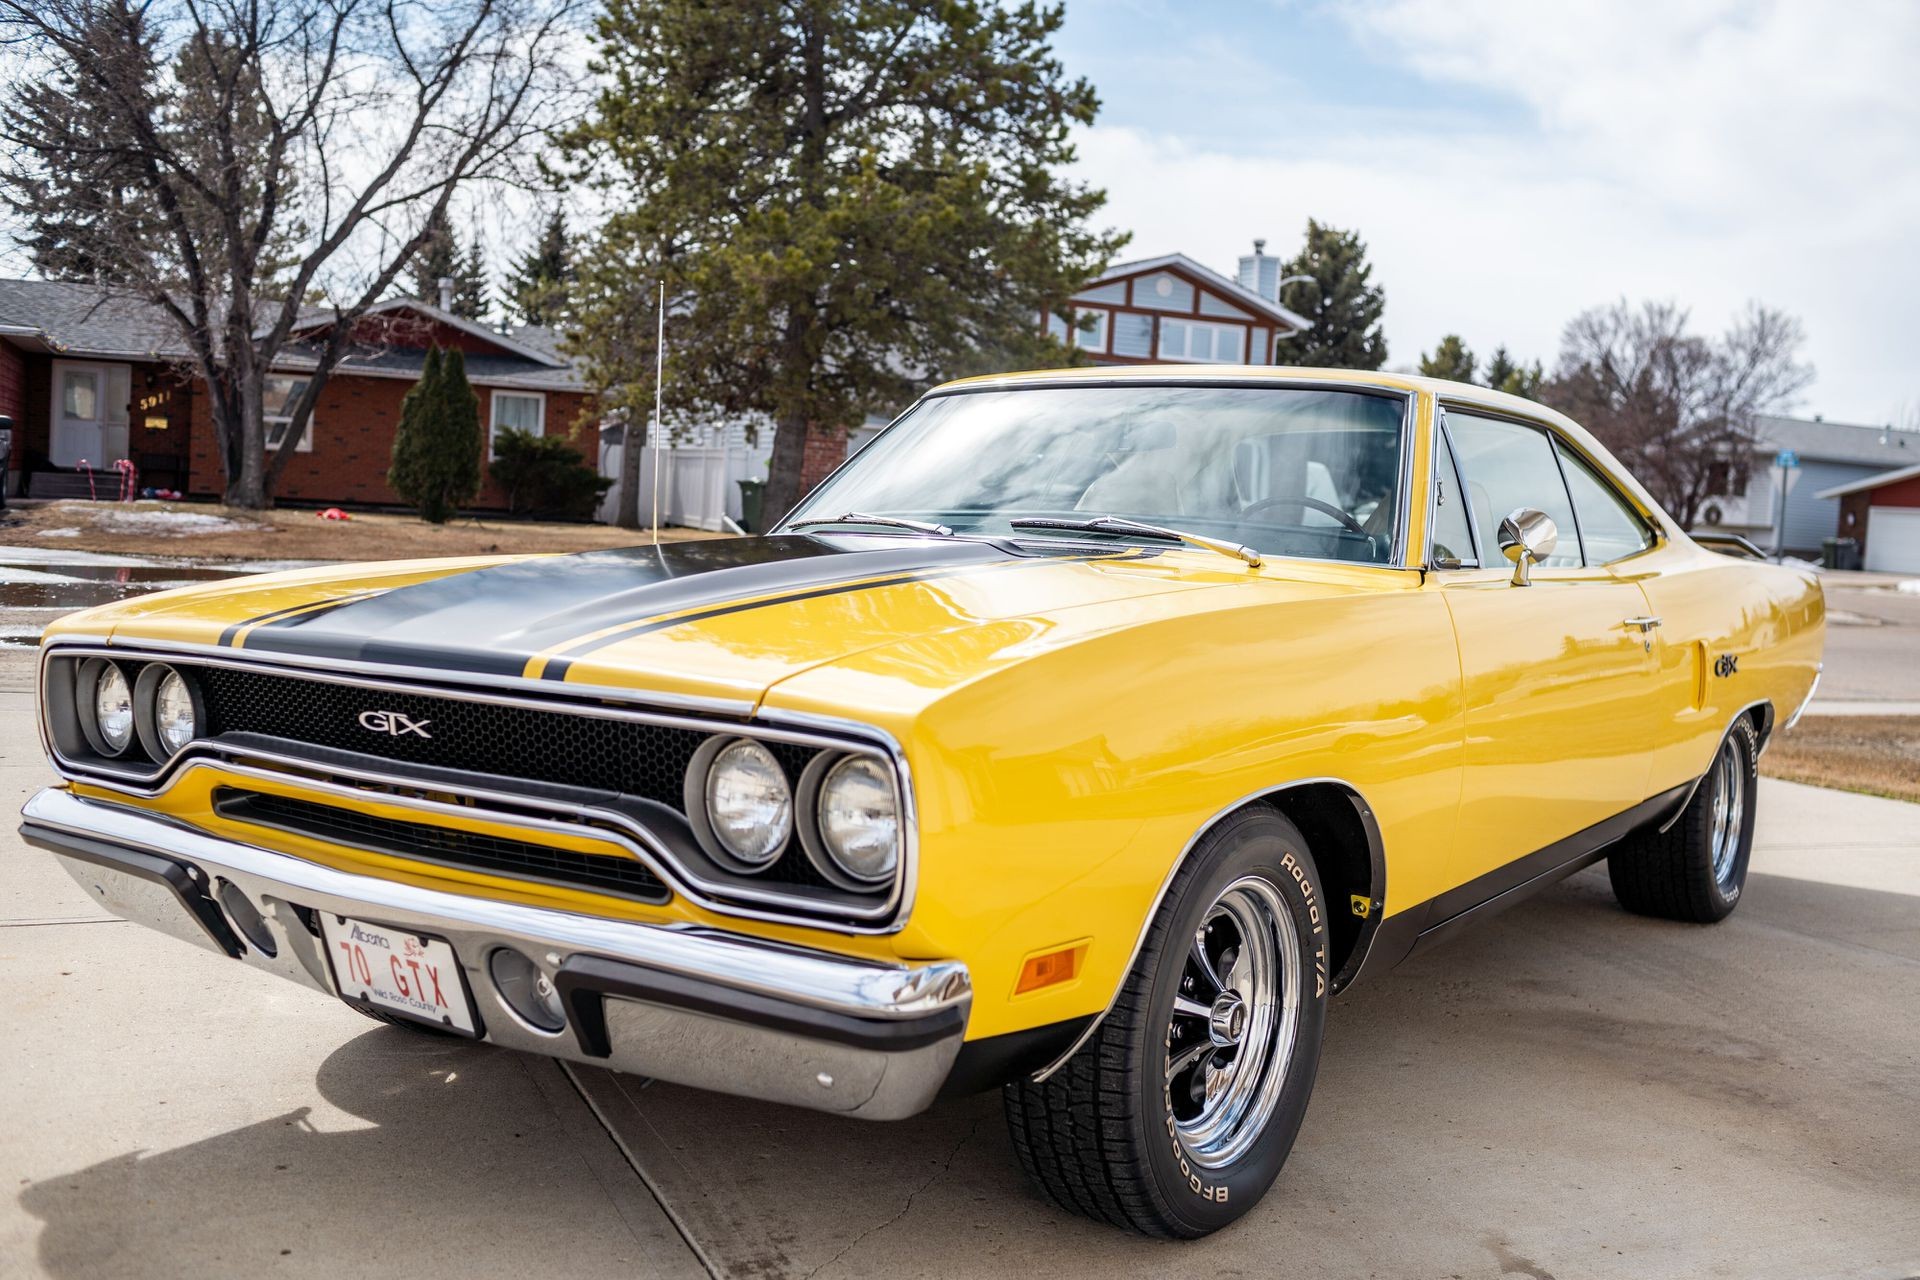 Find of the Day: This Ground-Pounding 1970 Plymouth GTX is Powered by a 496 Big-Block